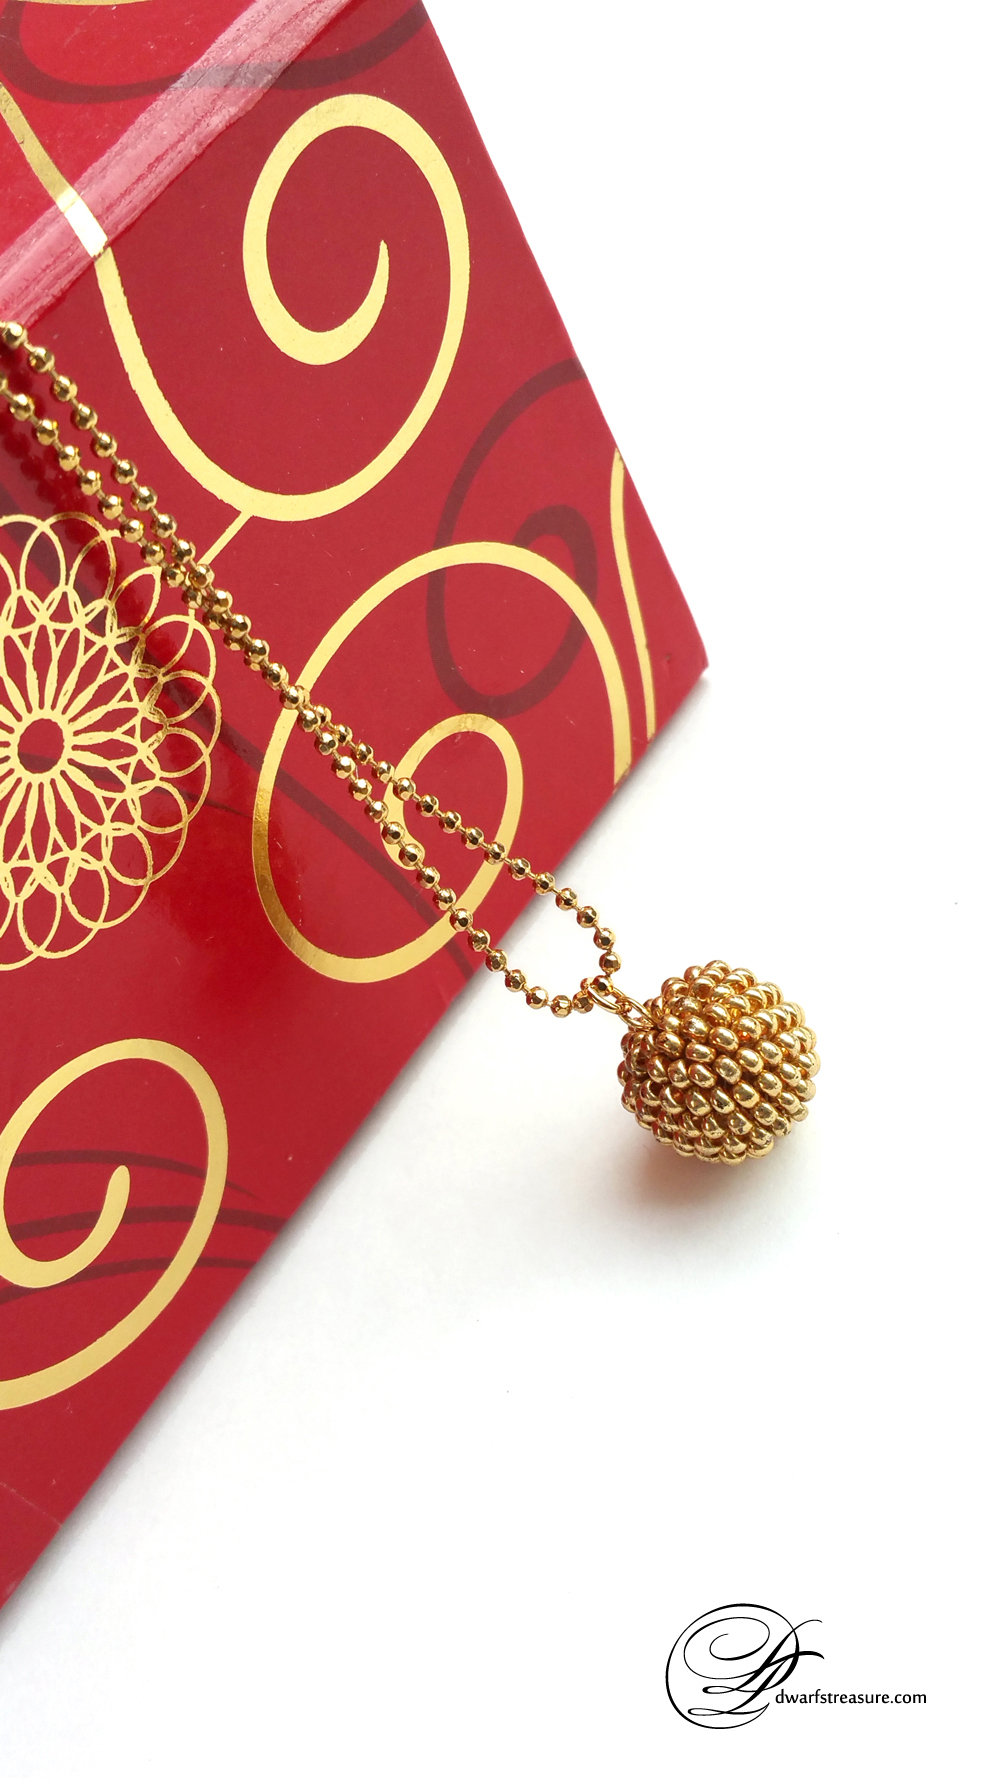 Exquisite gold glass bead ball charm